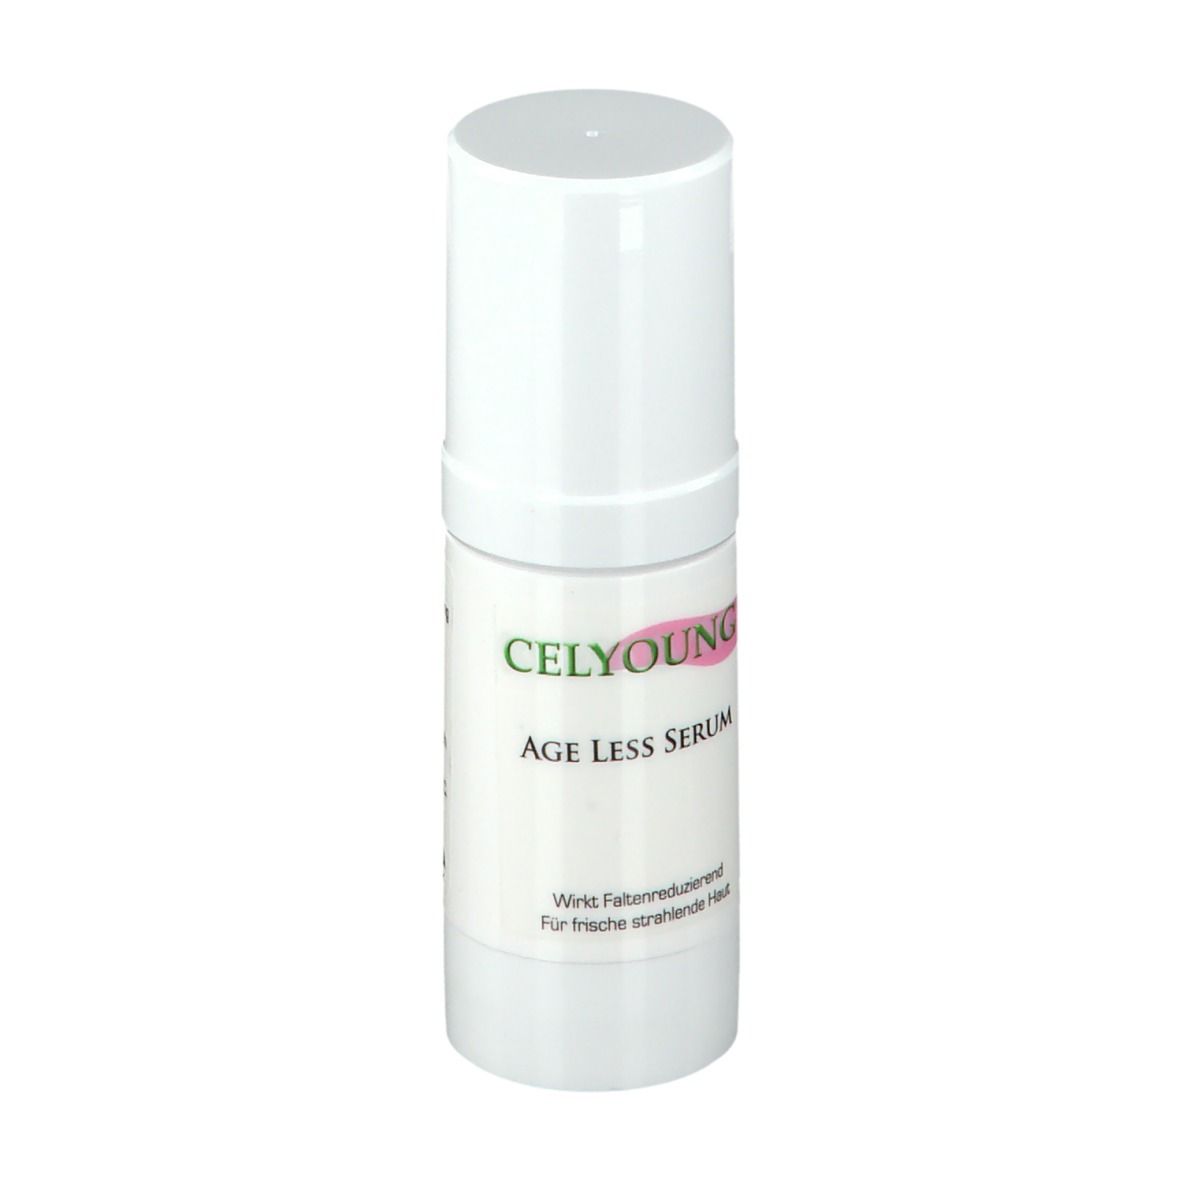 CELYOUNG® Age Less Serum